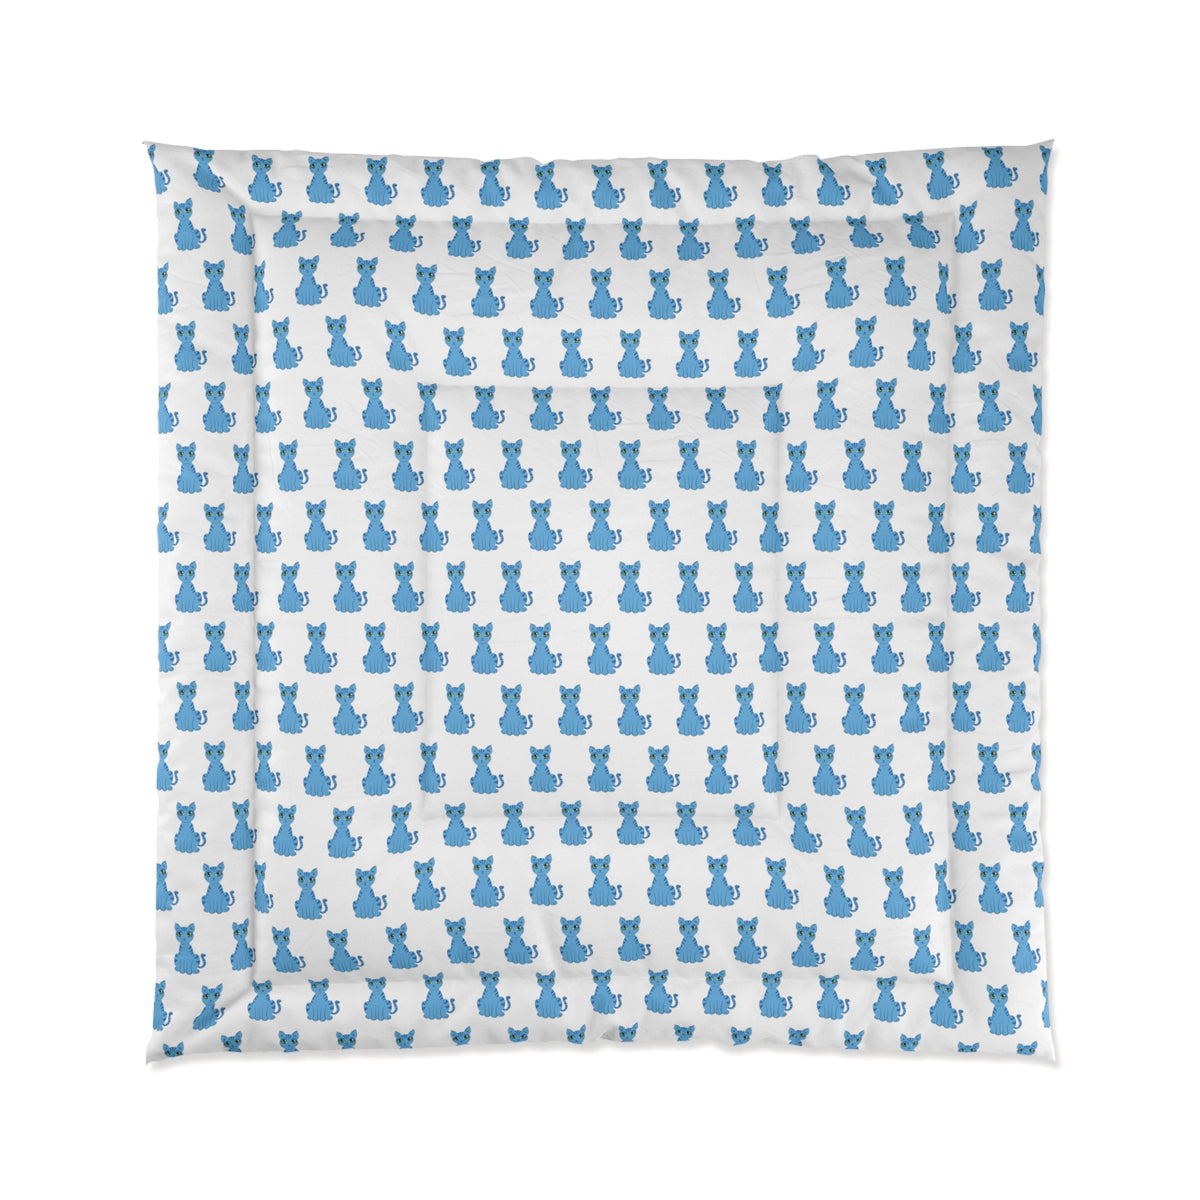 Unique Blue Cat with Green Eyes Pattern Comforter - Lightweight Polyester Bedding - Kawaii Esquire